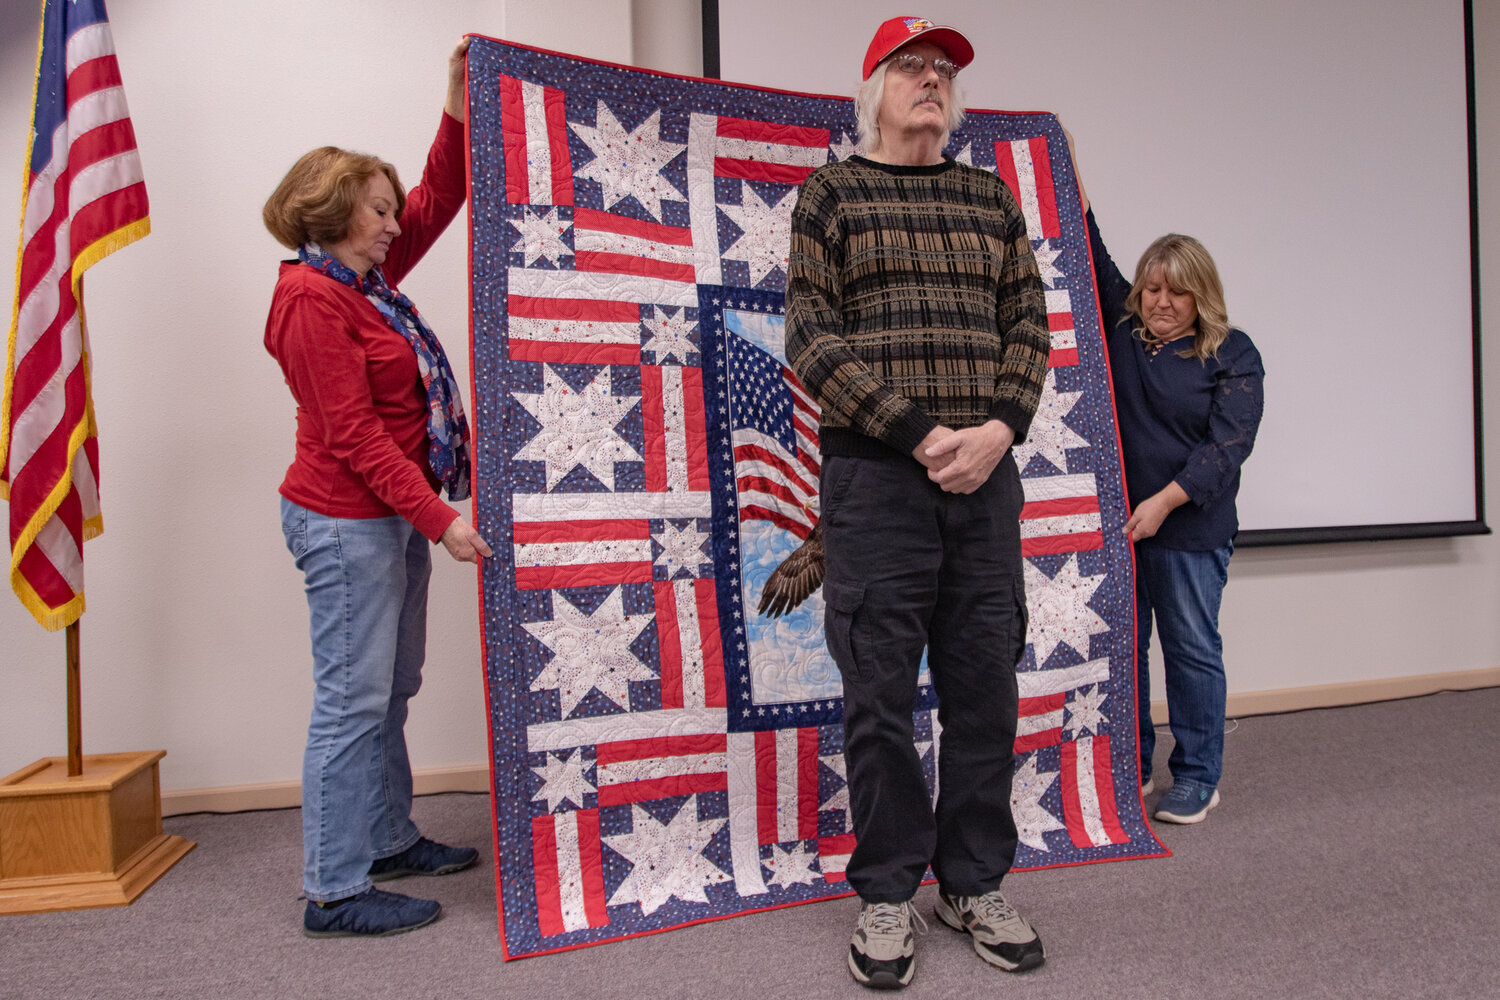 U.S. Army veteran Carl Stone stands in front of his quilt presented to him on Saturday, Nov. 11, by the Veterans Memorial Museum Quilts of Valor chapter.